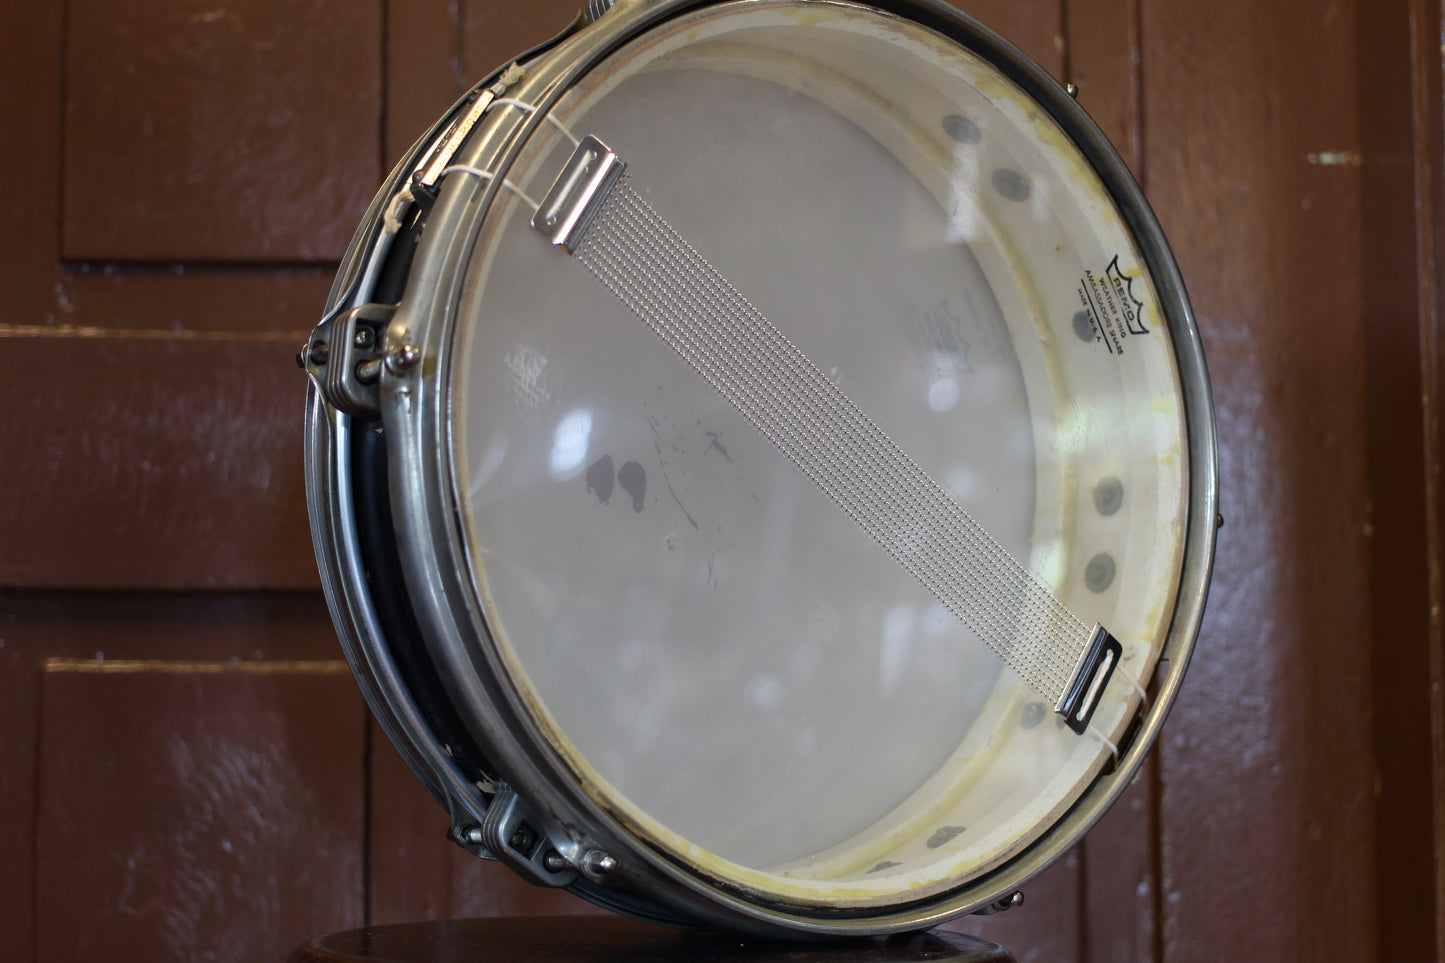 1965 Ludwig 3"x13" Jazz Combo in Black Lacquer